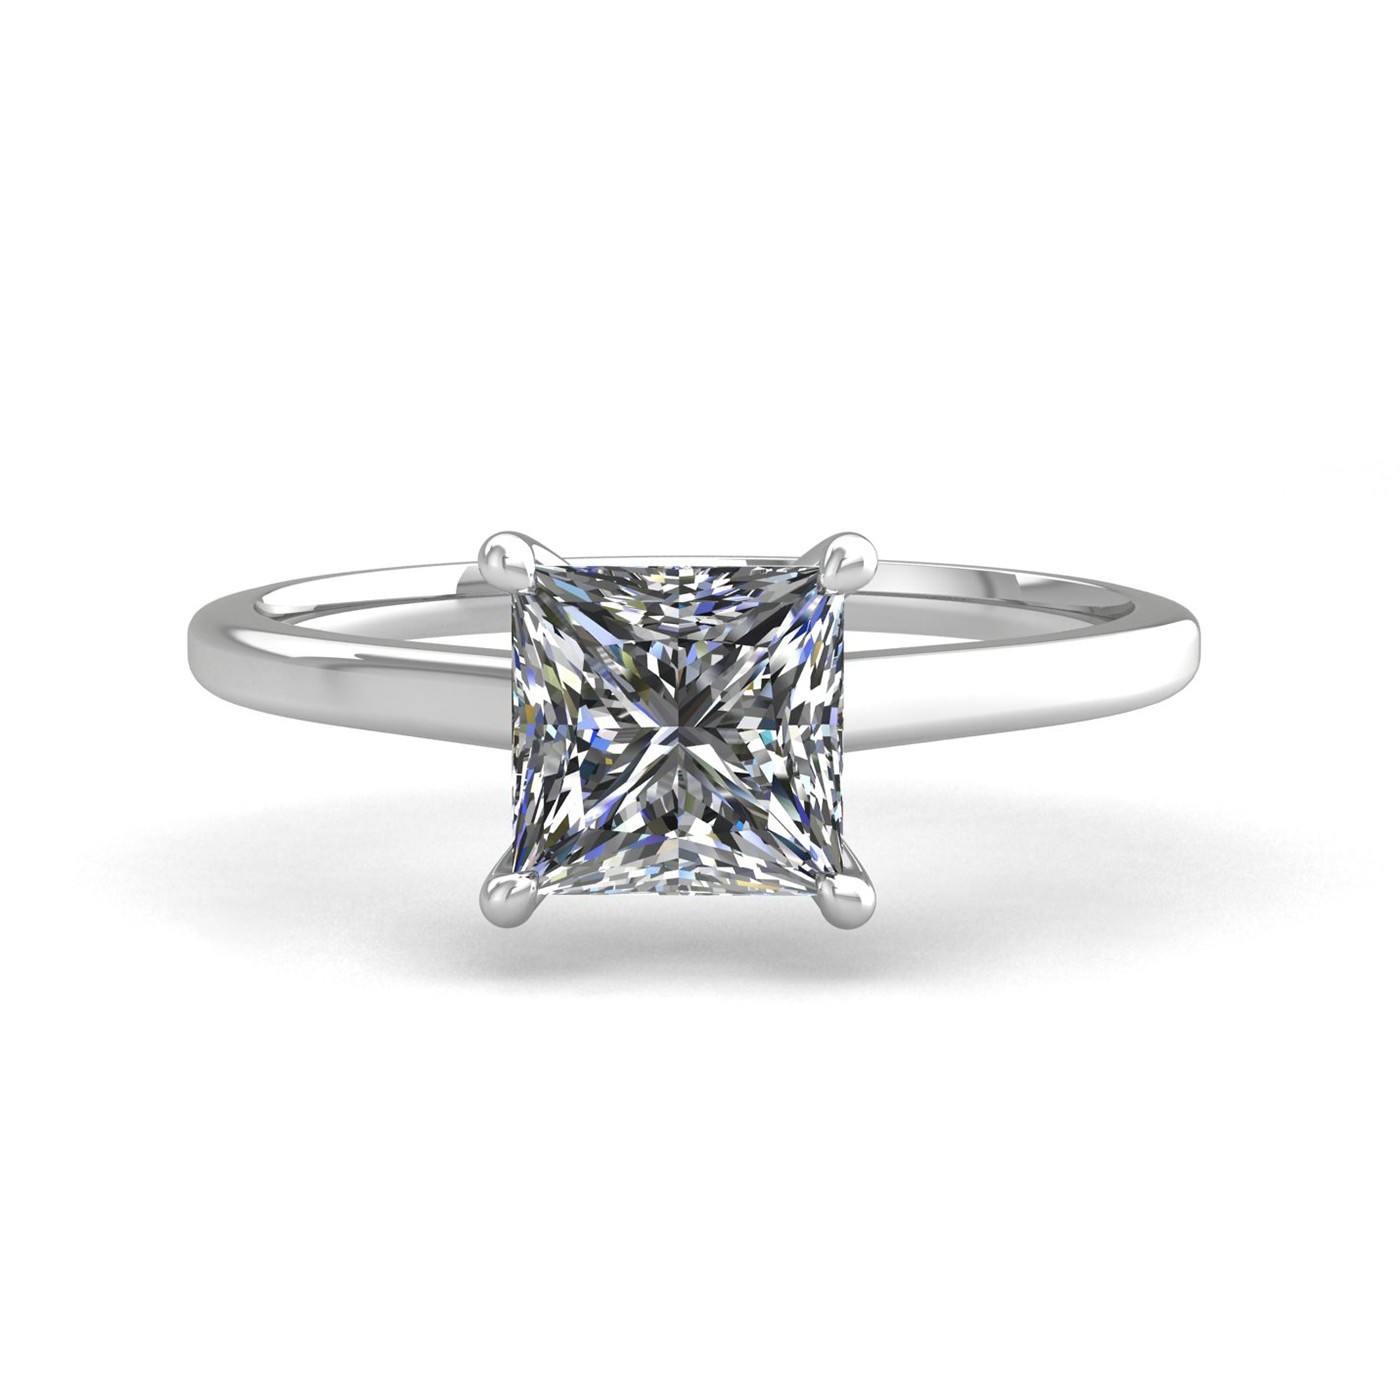 18k white gold  1,20 ct 4 prongs solitaire princess cut diamond engagement ring with whisper thin band Photos & images